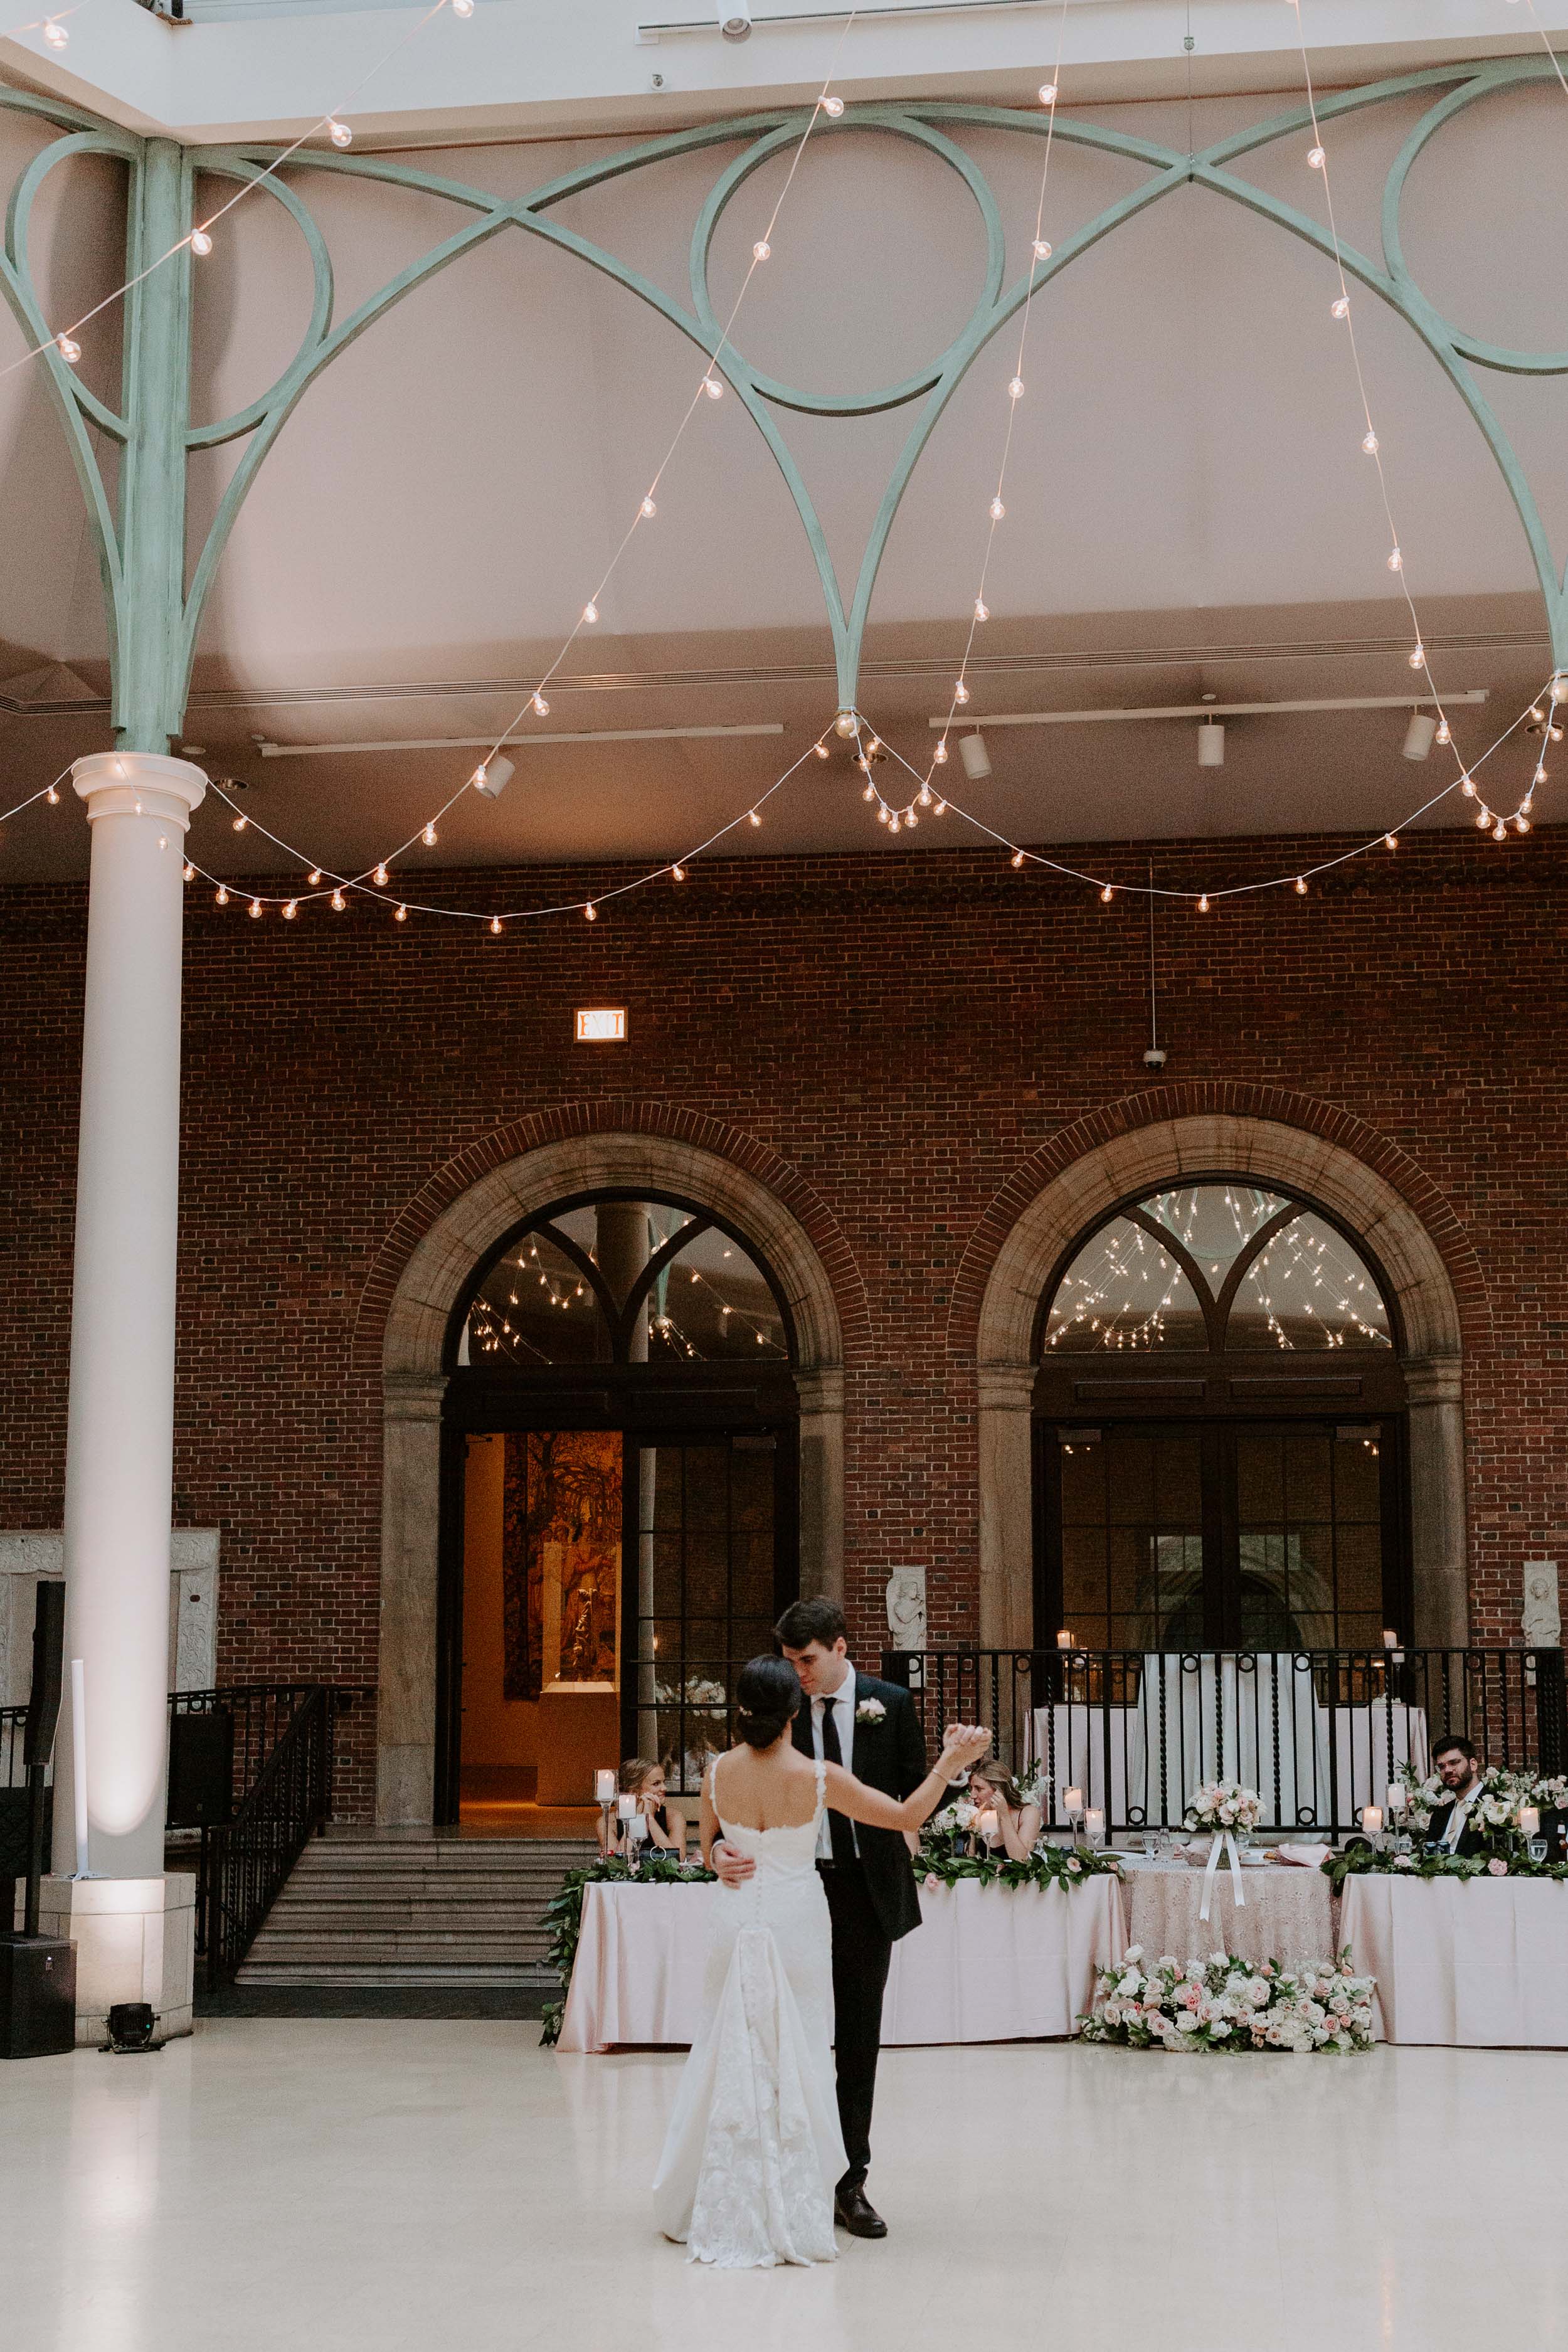 Dayton Art Institute Wedding Reception with florals and string lights in the hexagon-shaped Shaw Gothic Cloister